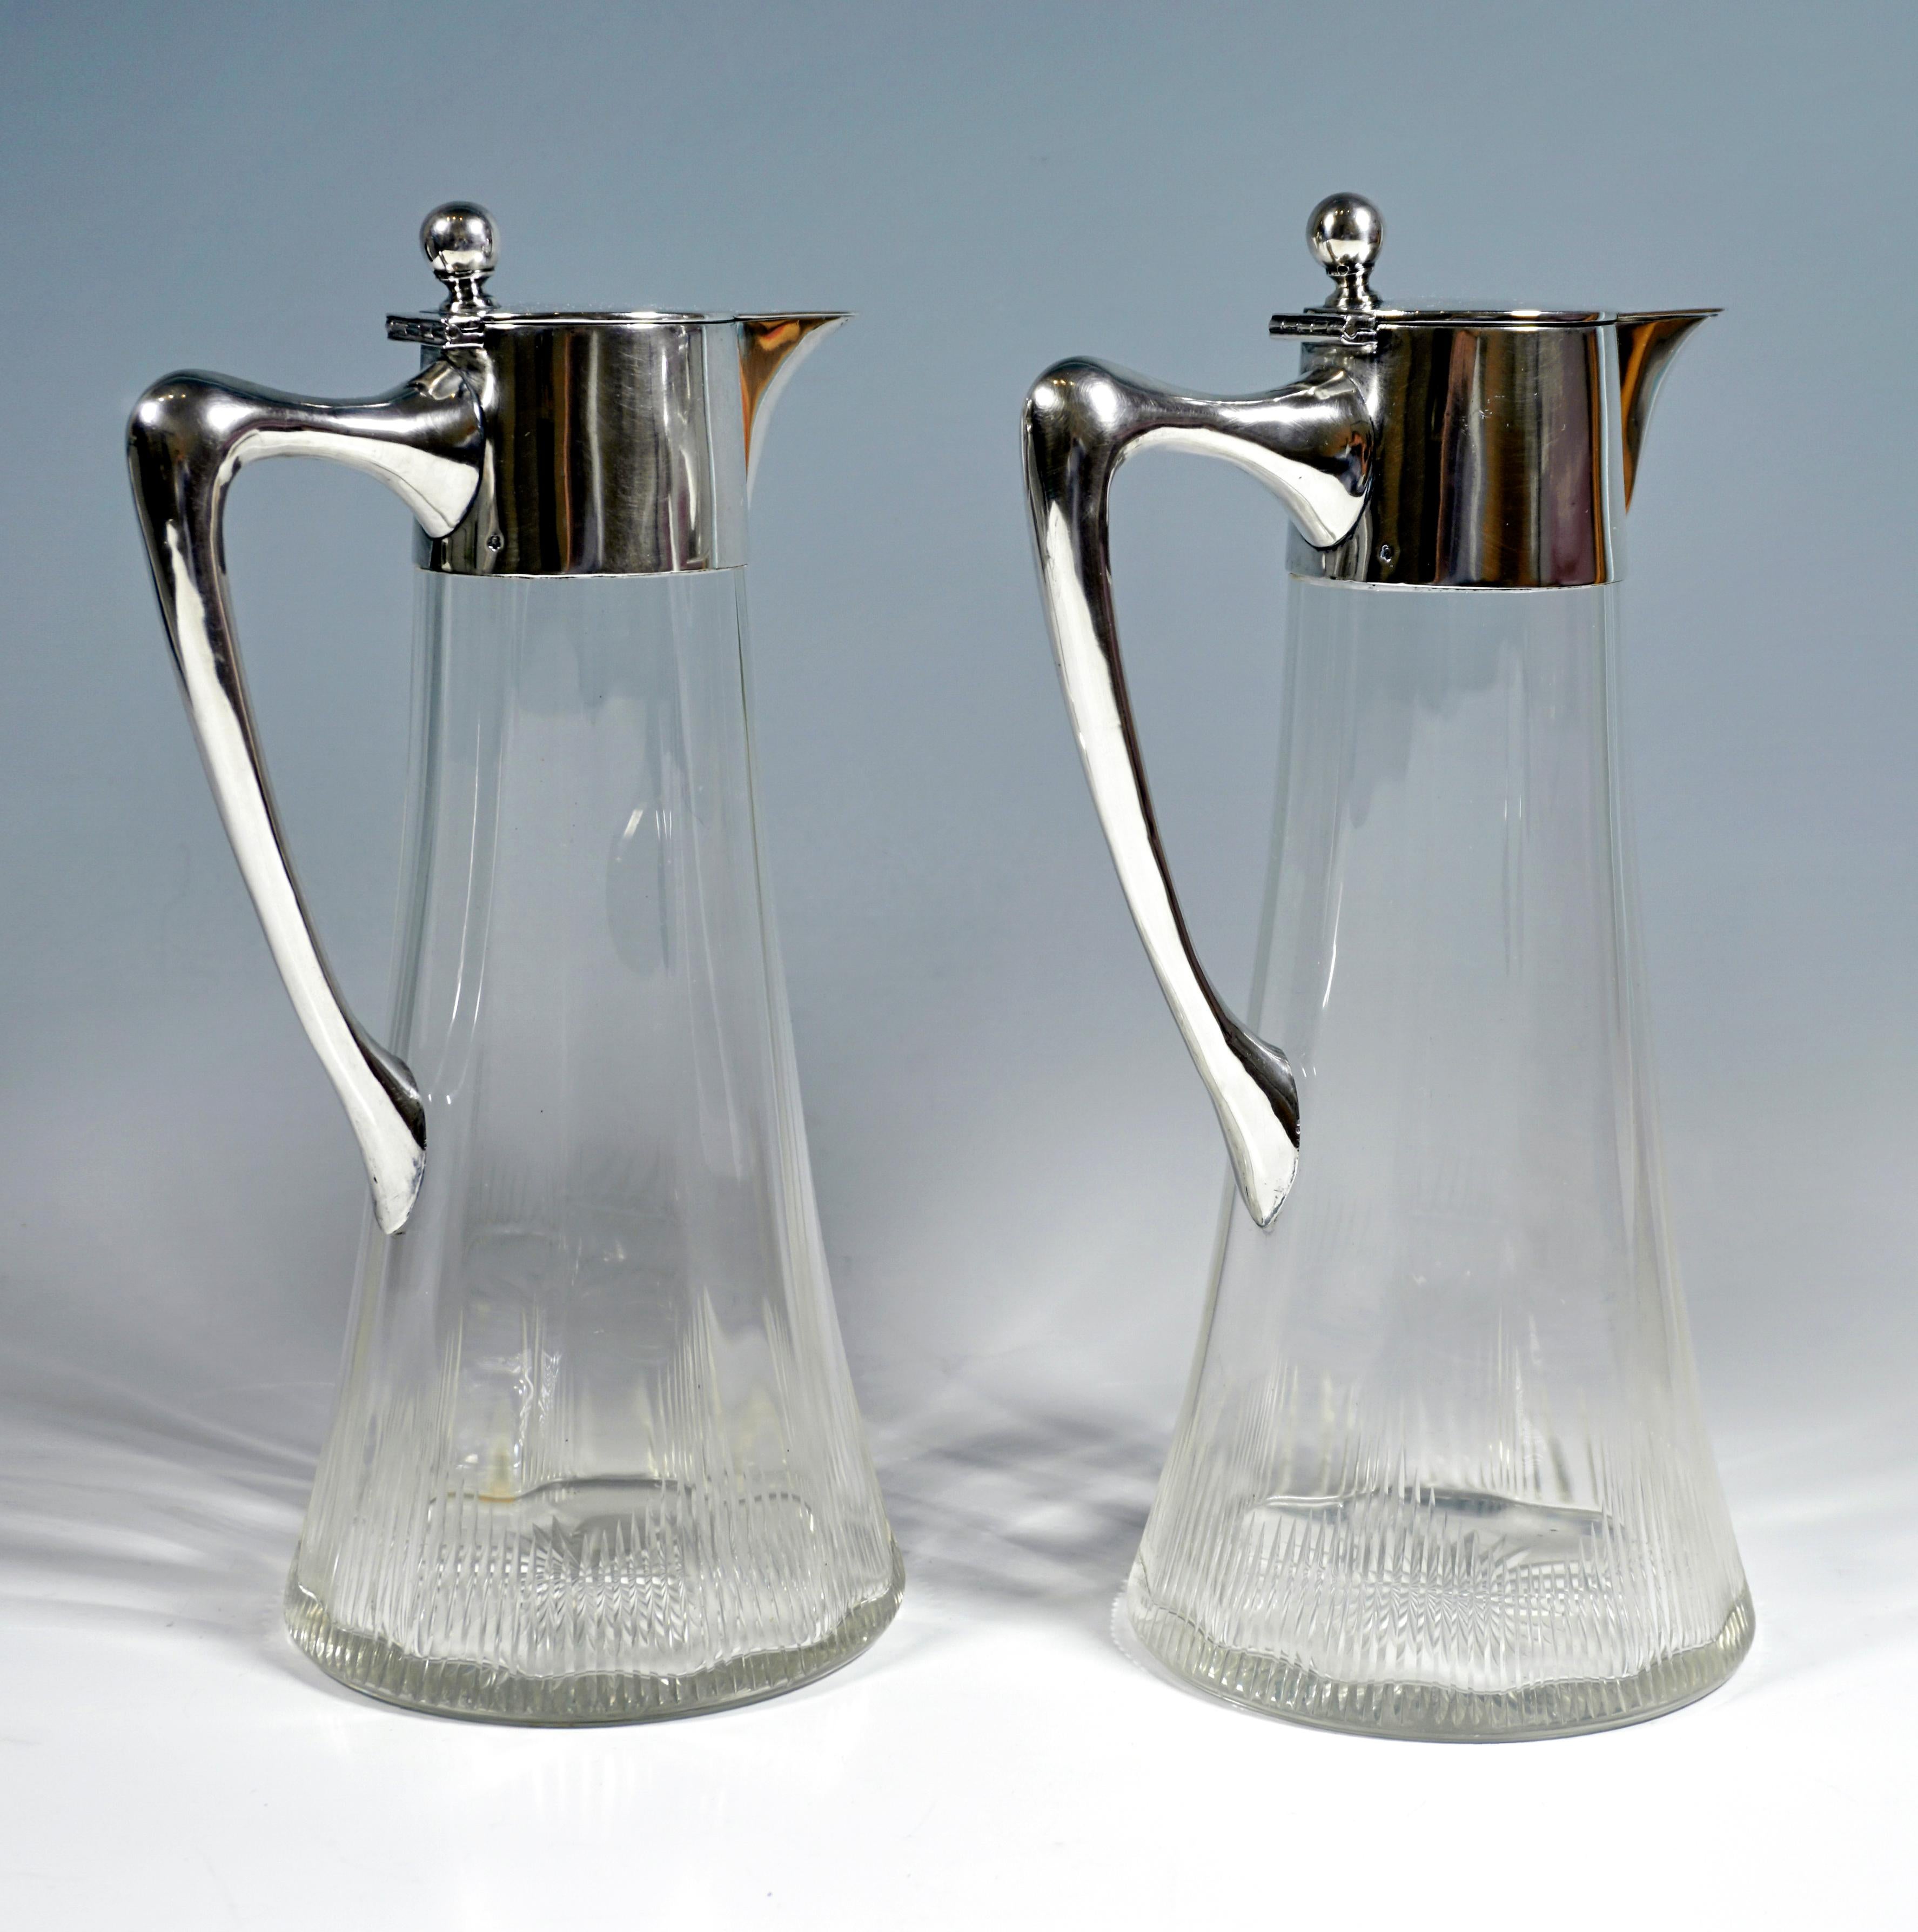 Two carafes made of clear glass with a conical body, a twelve-point, wavy thickened wall on the inside, decorated near the bottom with parallel cuts in a serrated shape, a bottom star, smooth silver fitting with a J-shaped, curved handle, covered